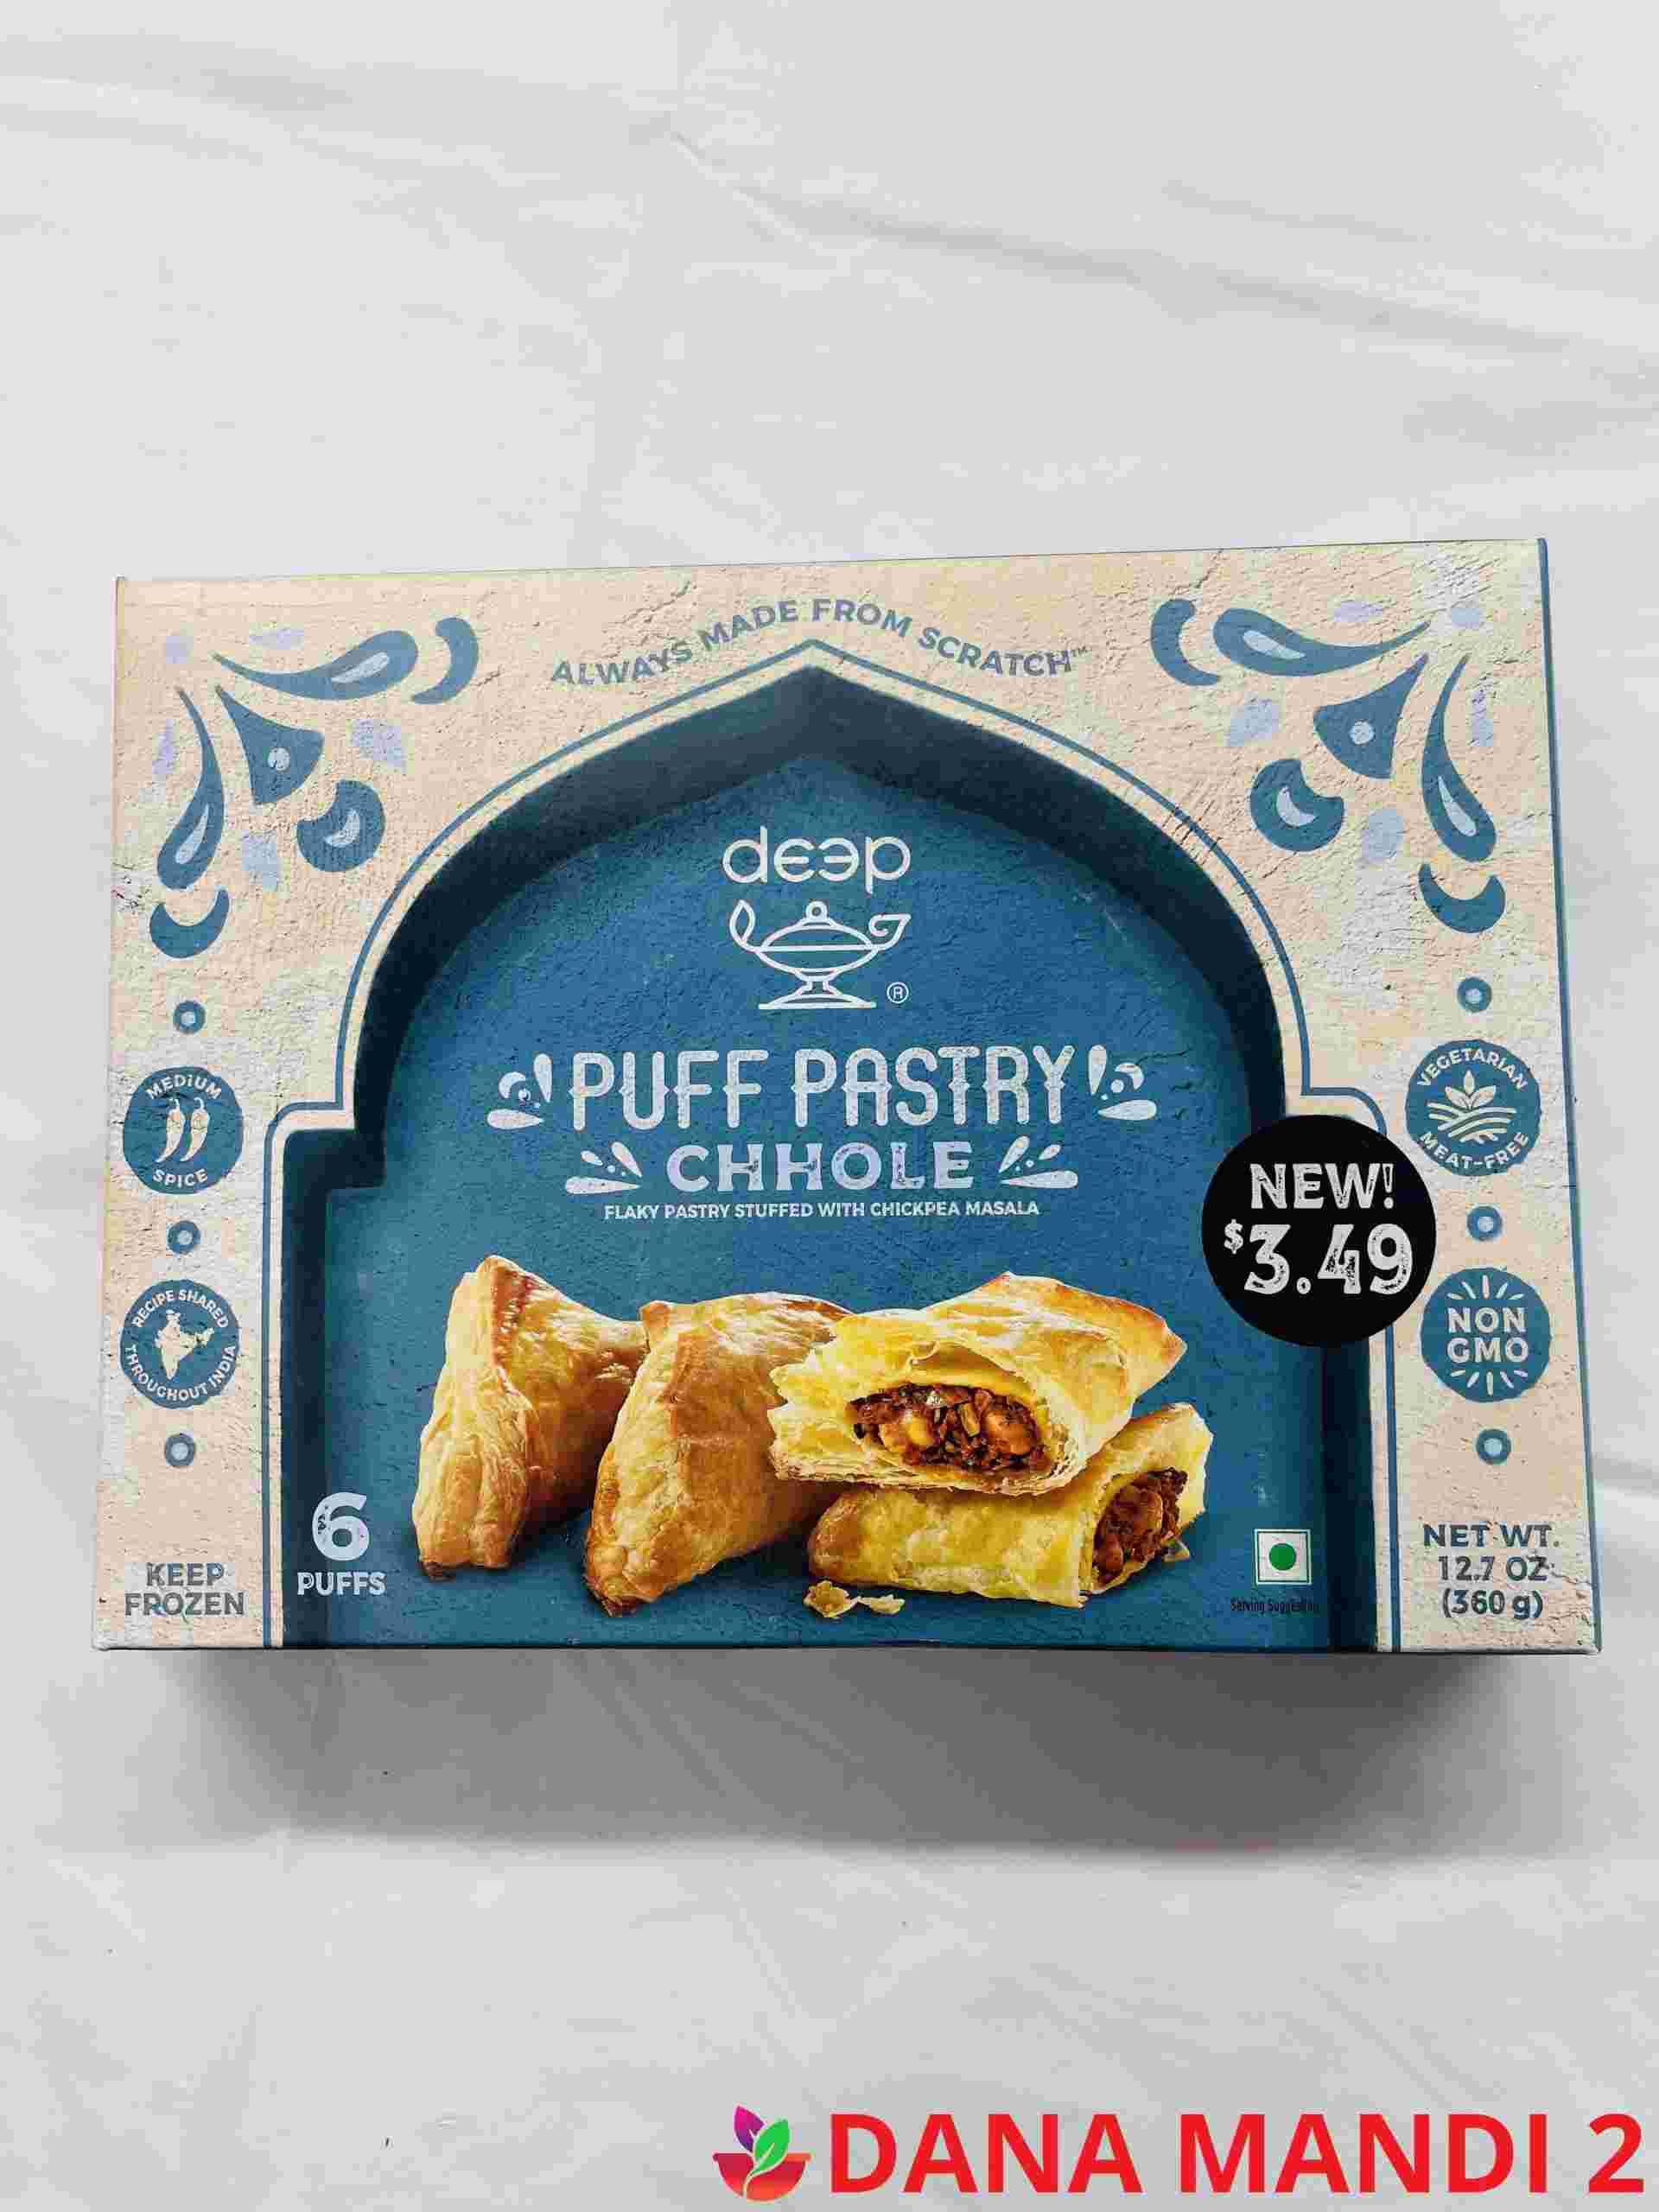 Deep  Puff Pastry Chhole 6 Puffs